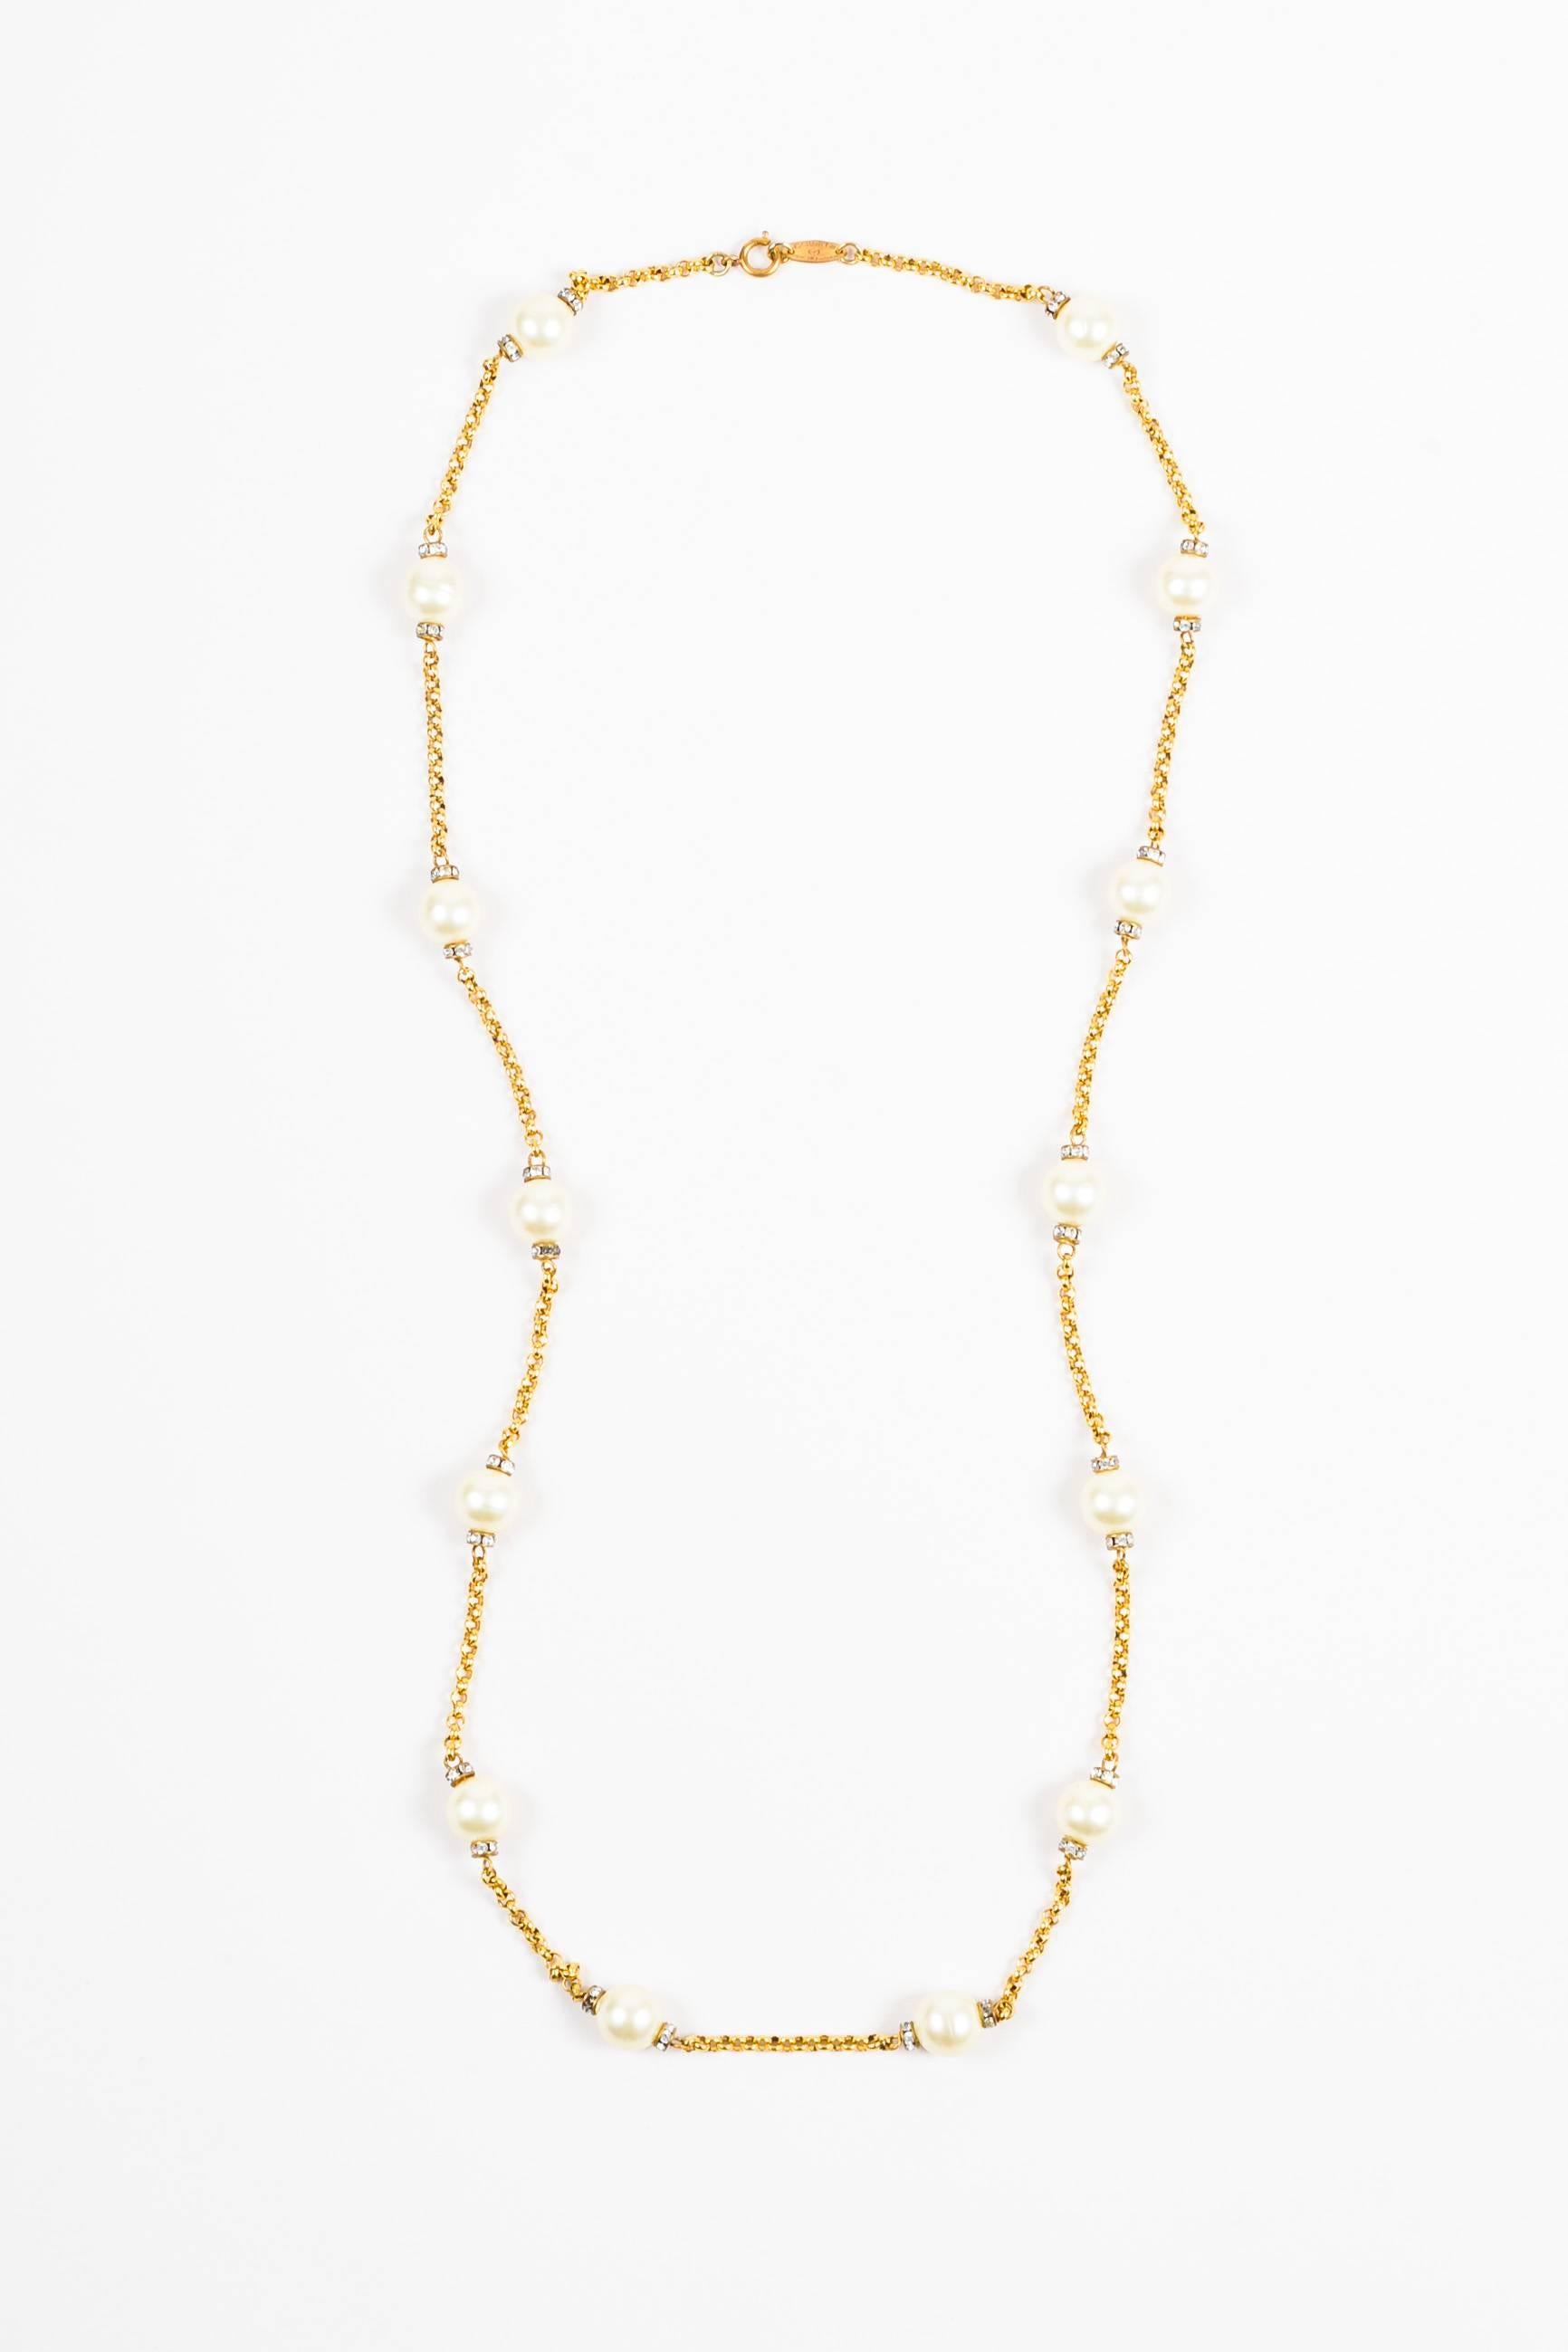 VINTAGE Chanel gold-tone metal strand necklace featuring round faux pearl beading between clear crystal rhinestones. Springring closure. Circa 1980's.

Measurements
Total Length: 36.125